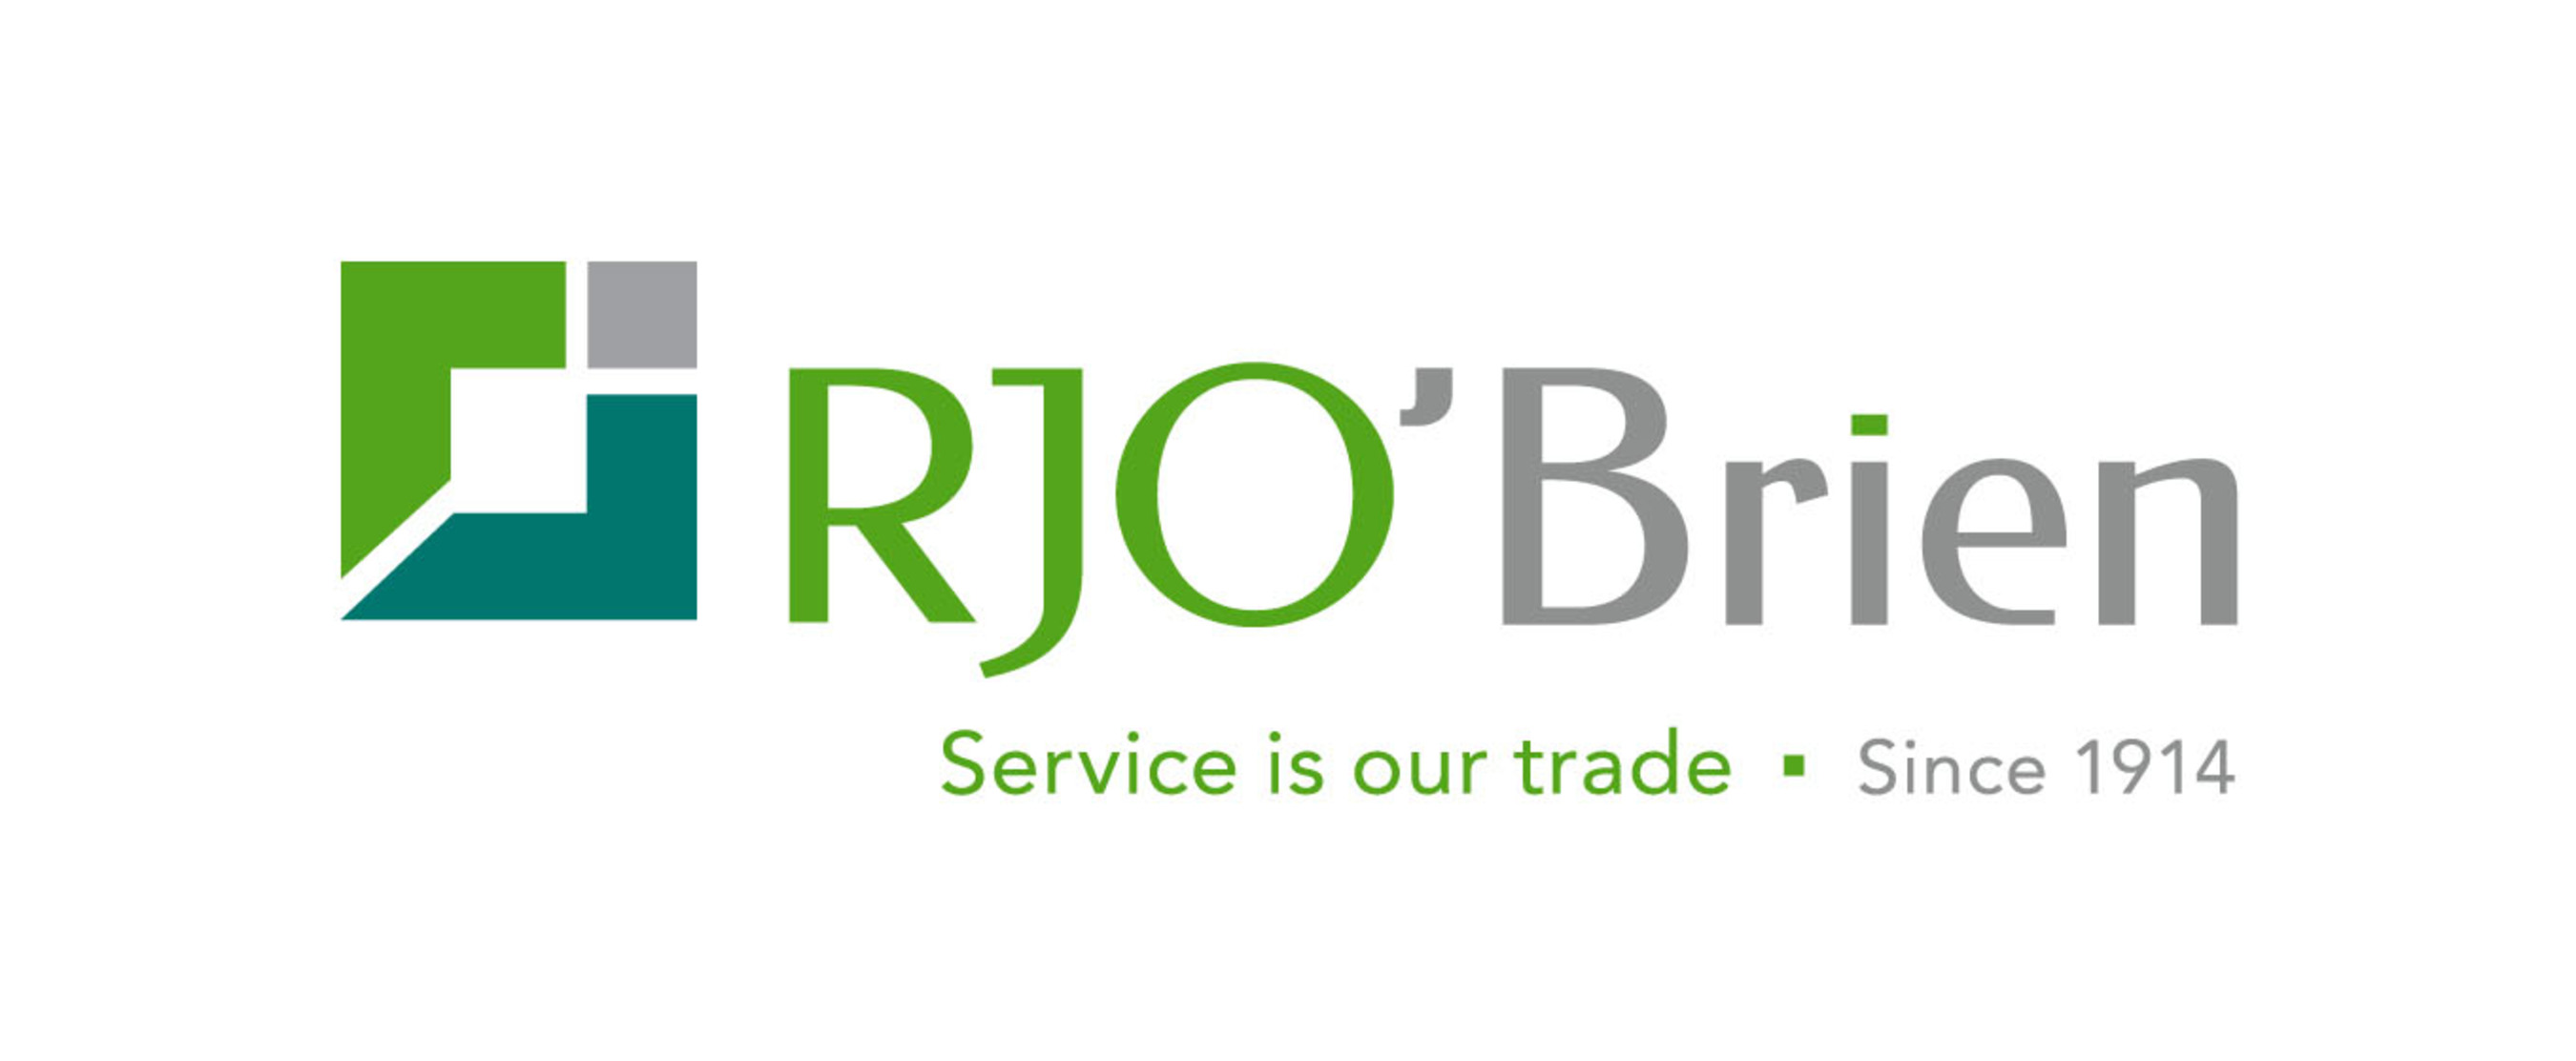 R.J. O’Brien & Associates (RJO) is the oldest and largest independent futures brokerage and clearing firm in the United States.